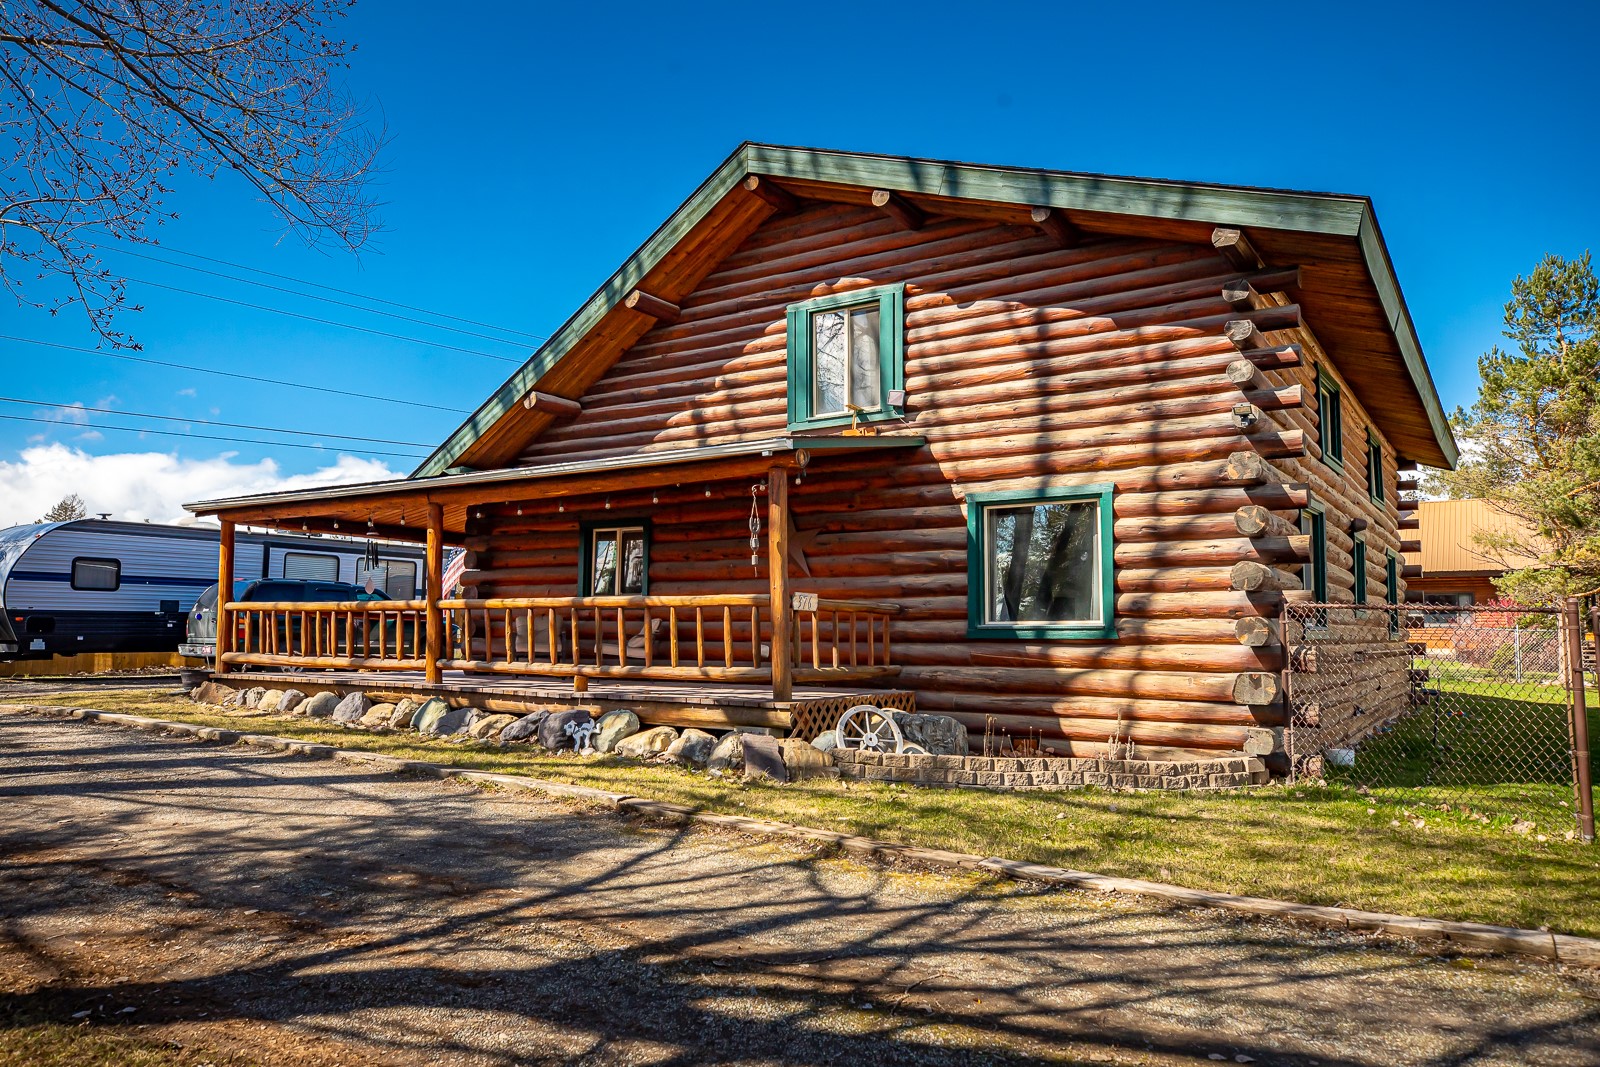 This Log home embodies rustic charm and comfort situated on a .45 acre parcel. VRBO potential. The spacious living/dining area features two natural gas fireplaces, perfect to heat the entire home and cozy up on chilly evenings.  The home offers 3 Bedrooms and 2 Full Baths.  The primary bedroom and laundry room are located on the main floor. The loft den offers a versatile space that can serve as a home office, library or cozy retreat for unwinding with a good book.  For hobbyists and do it yourself enthusiasts, a 24'x40' (960 sf) insulated heated/shop garage offers ample space for tinkering and storage, adding both functionality and value to the property. Outside the property is a haven to enjoy the outdoors, the fenced yard and pet door access are a plus to keep your pets happy and safe. A fire pit invites evenings to gather with friends under the starlit sky.  Additional parking for RVs and Boats ensures that adventures are always within reach. VRBO opportunity/Short term rental. Conveniently located in Happy Valley, you will have easy access to the charming town of Whitefish and all it's amenities along with other Flathead communities.  You can enjoy the nearby Happy Valley State Trust lands with 50 trails for mountain biking, hiking or a stroll with your pet.  This log home is an idyllic retreat for those seeking a quintessential Montana lifestyle.  Call Ellie Johnson at 406-250-1575, or your real estate professional.